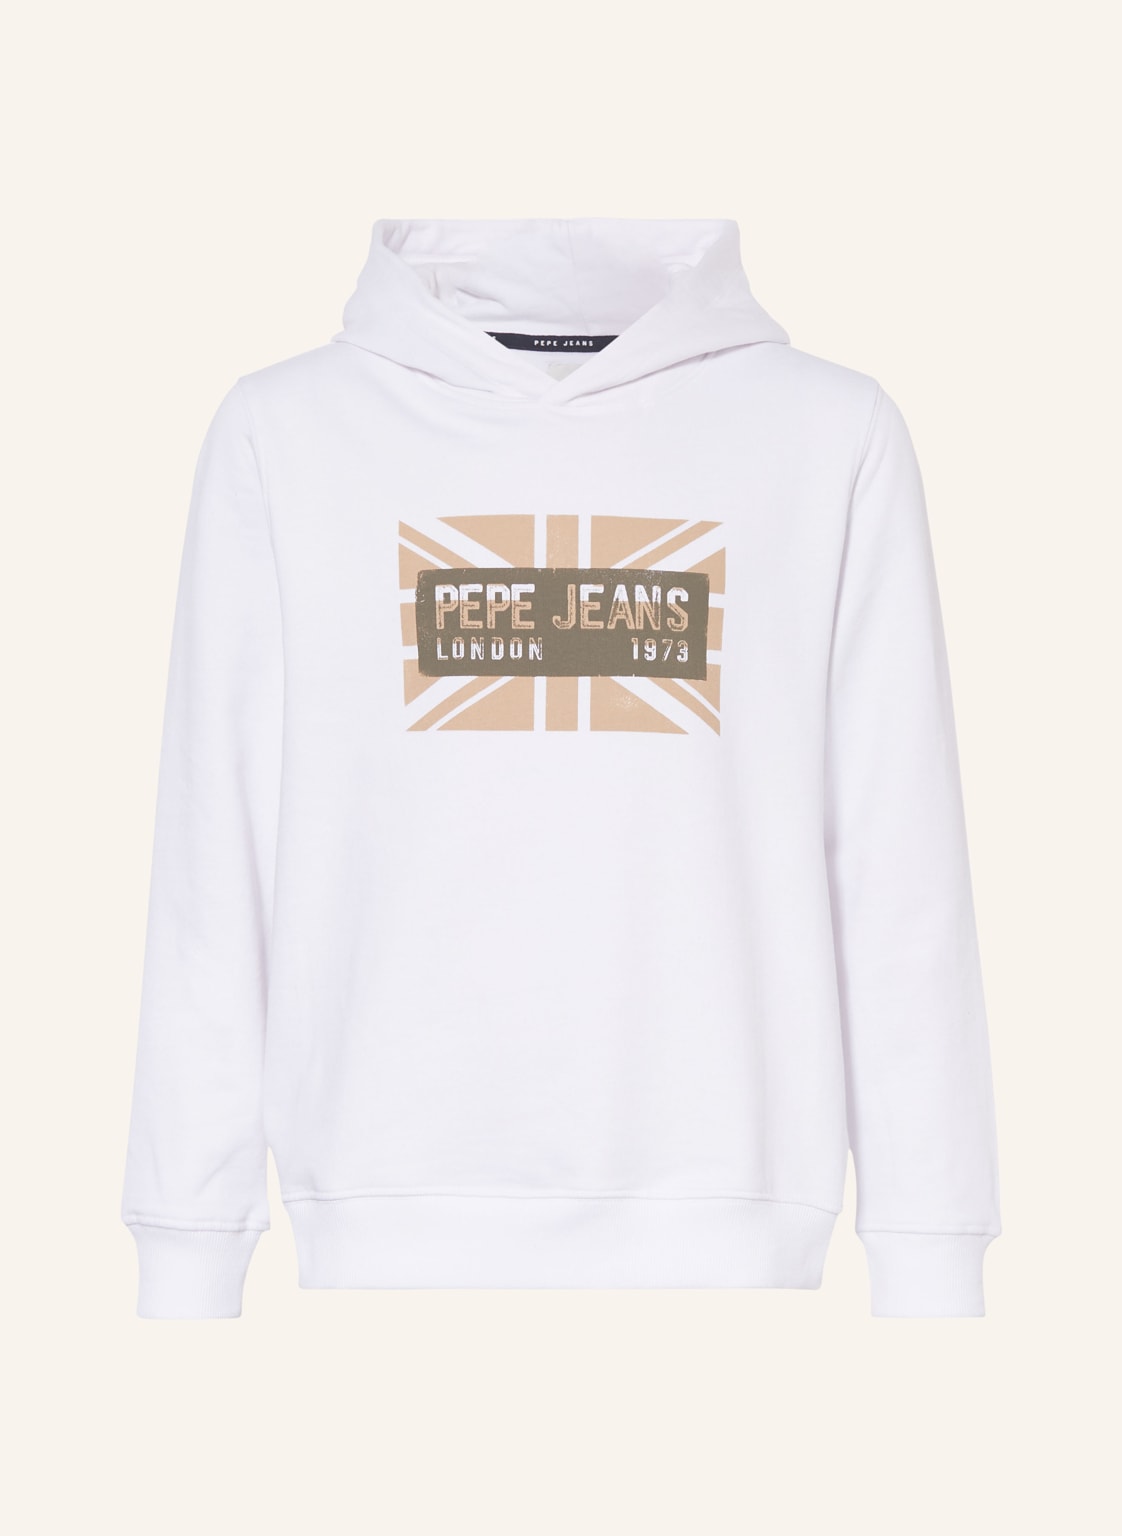 Pepe Jeans Hoodie weiss von Pepe Jeans